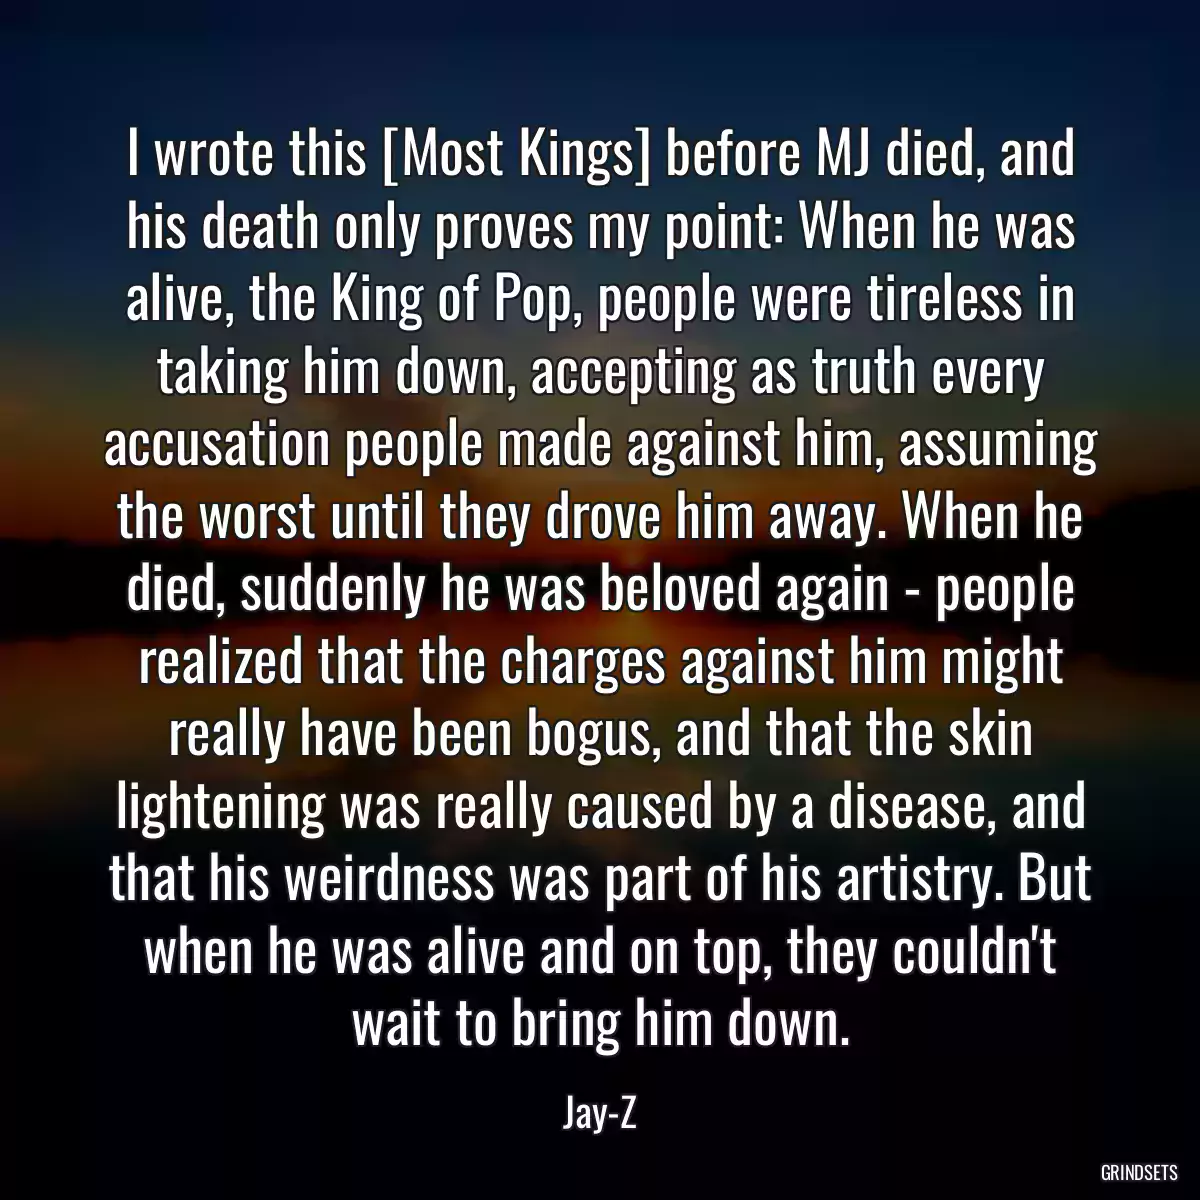 I wrote this [Most Kings] before MJ died, and his death only proves my point: When he was alive, the King of Pop, people were tireless in taking him down, accepting as truth every accusation people made against him, assuming the worst until they drove him away. When he died, suddenly he was beloved again - people realized that the charges against him might really have been bogus, and that the skin lightening was really caused by a disease, and that his weirdness was part of his artistry. But when he was alive and on top, they couldn\'t wait to bring him down.